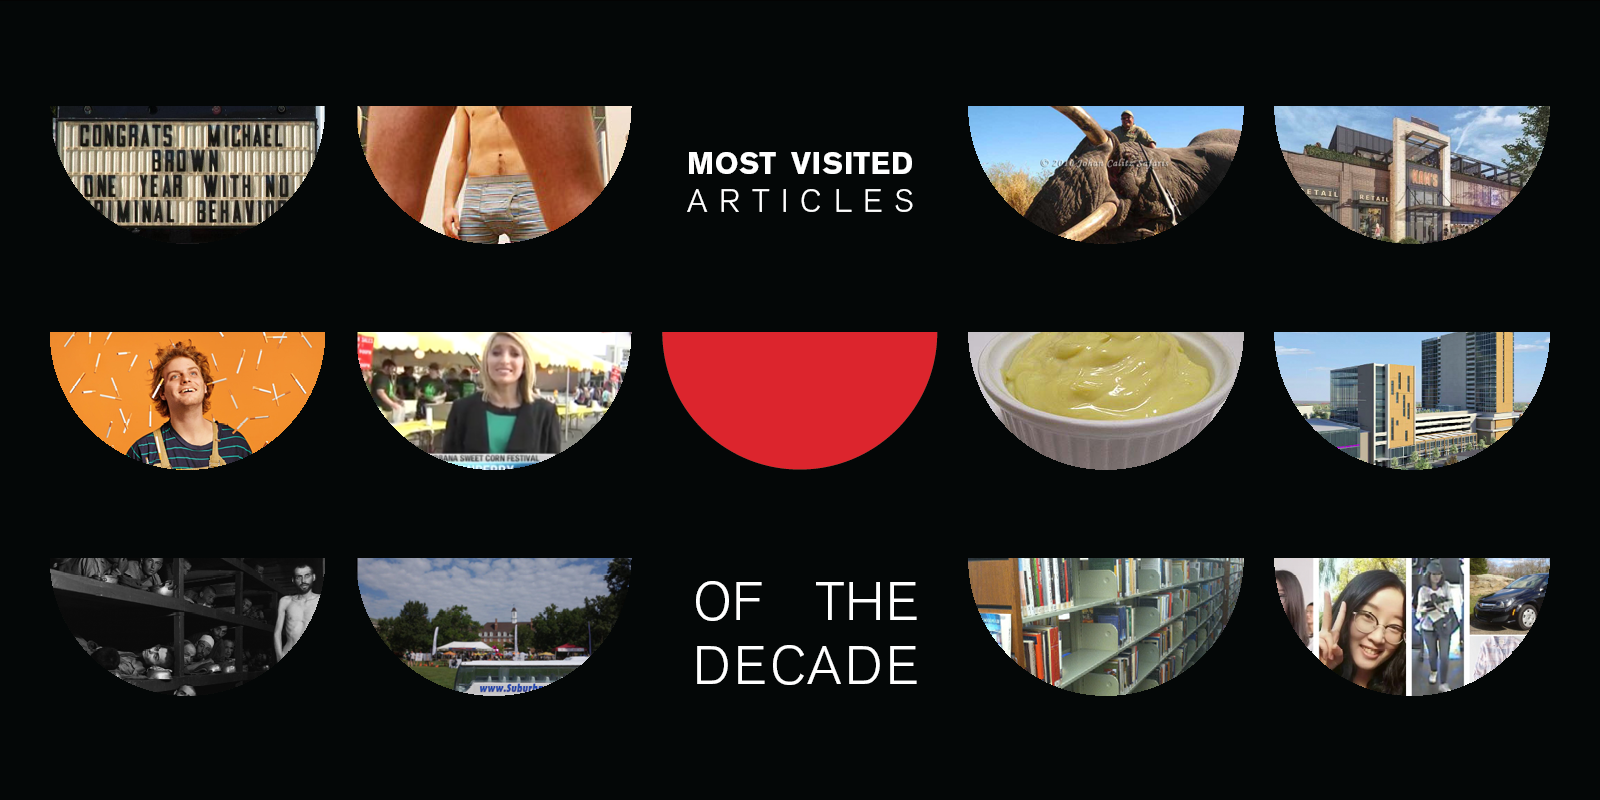 Most visited articles of the decade: 2010-2019